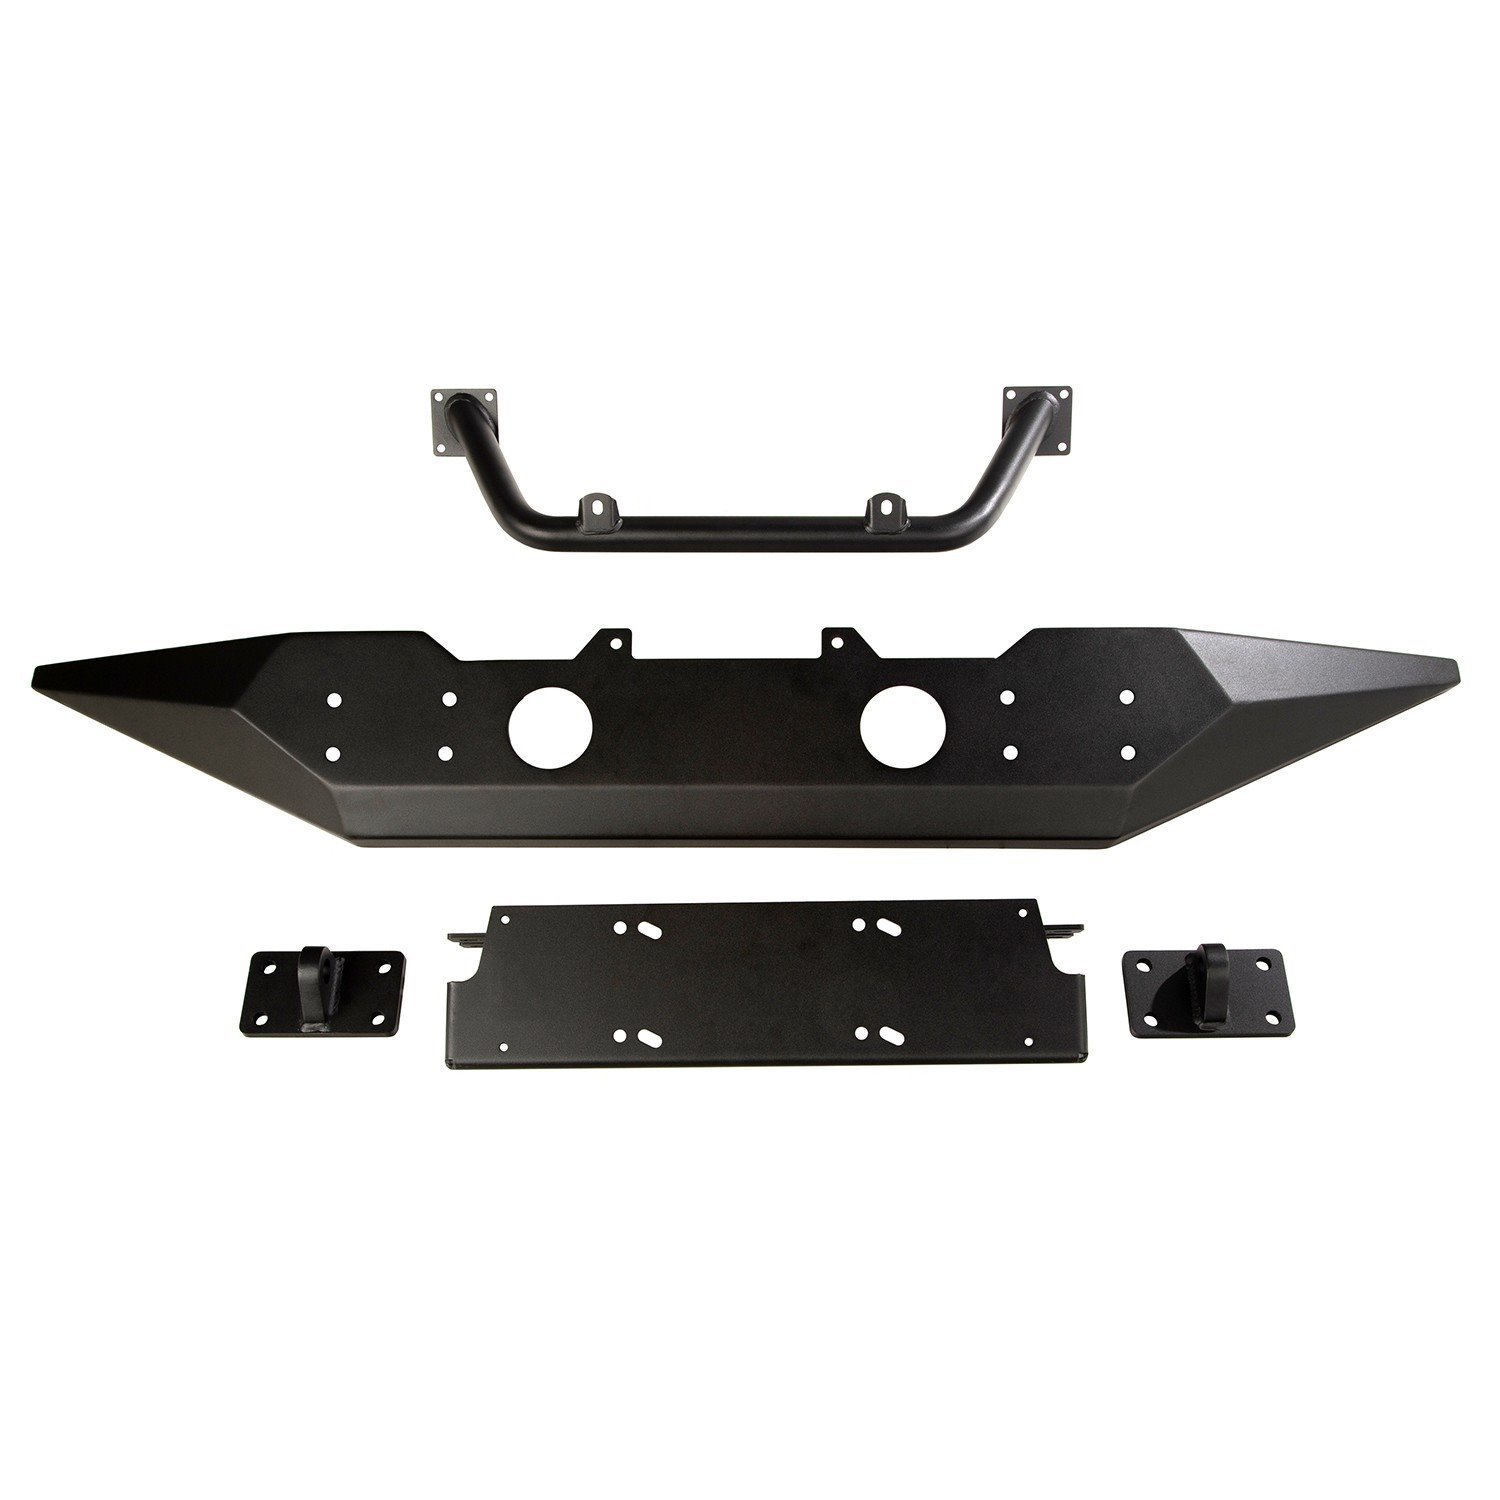 Standard Clearance Spartan Front Bumper for 2018-2019 Jeep Wrangler JL